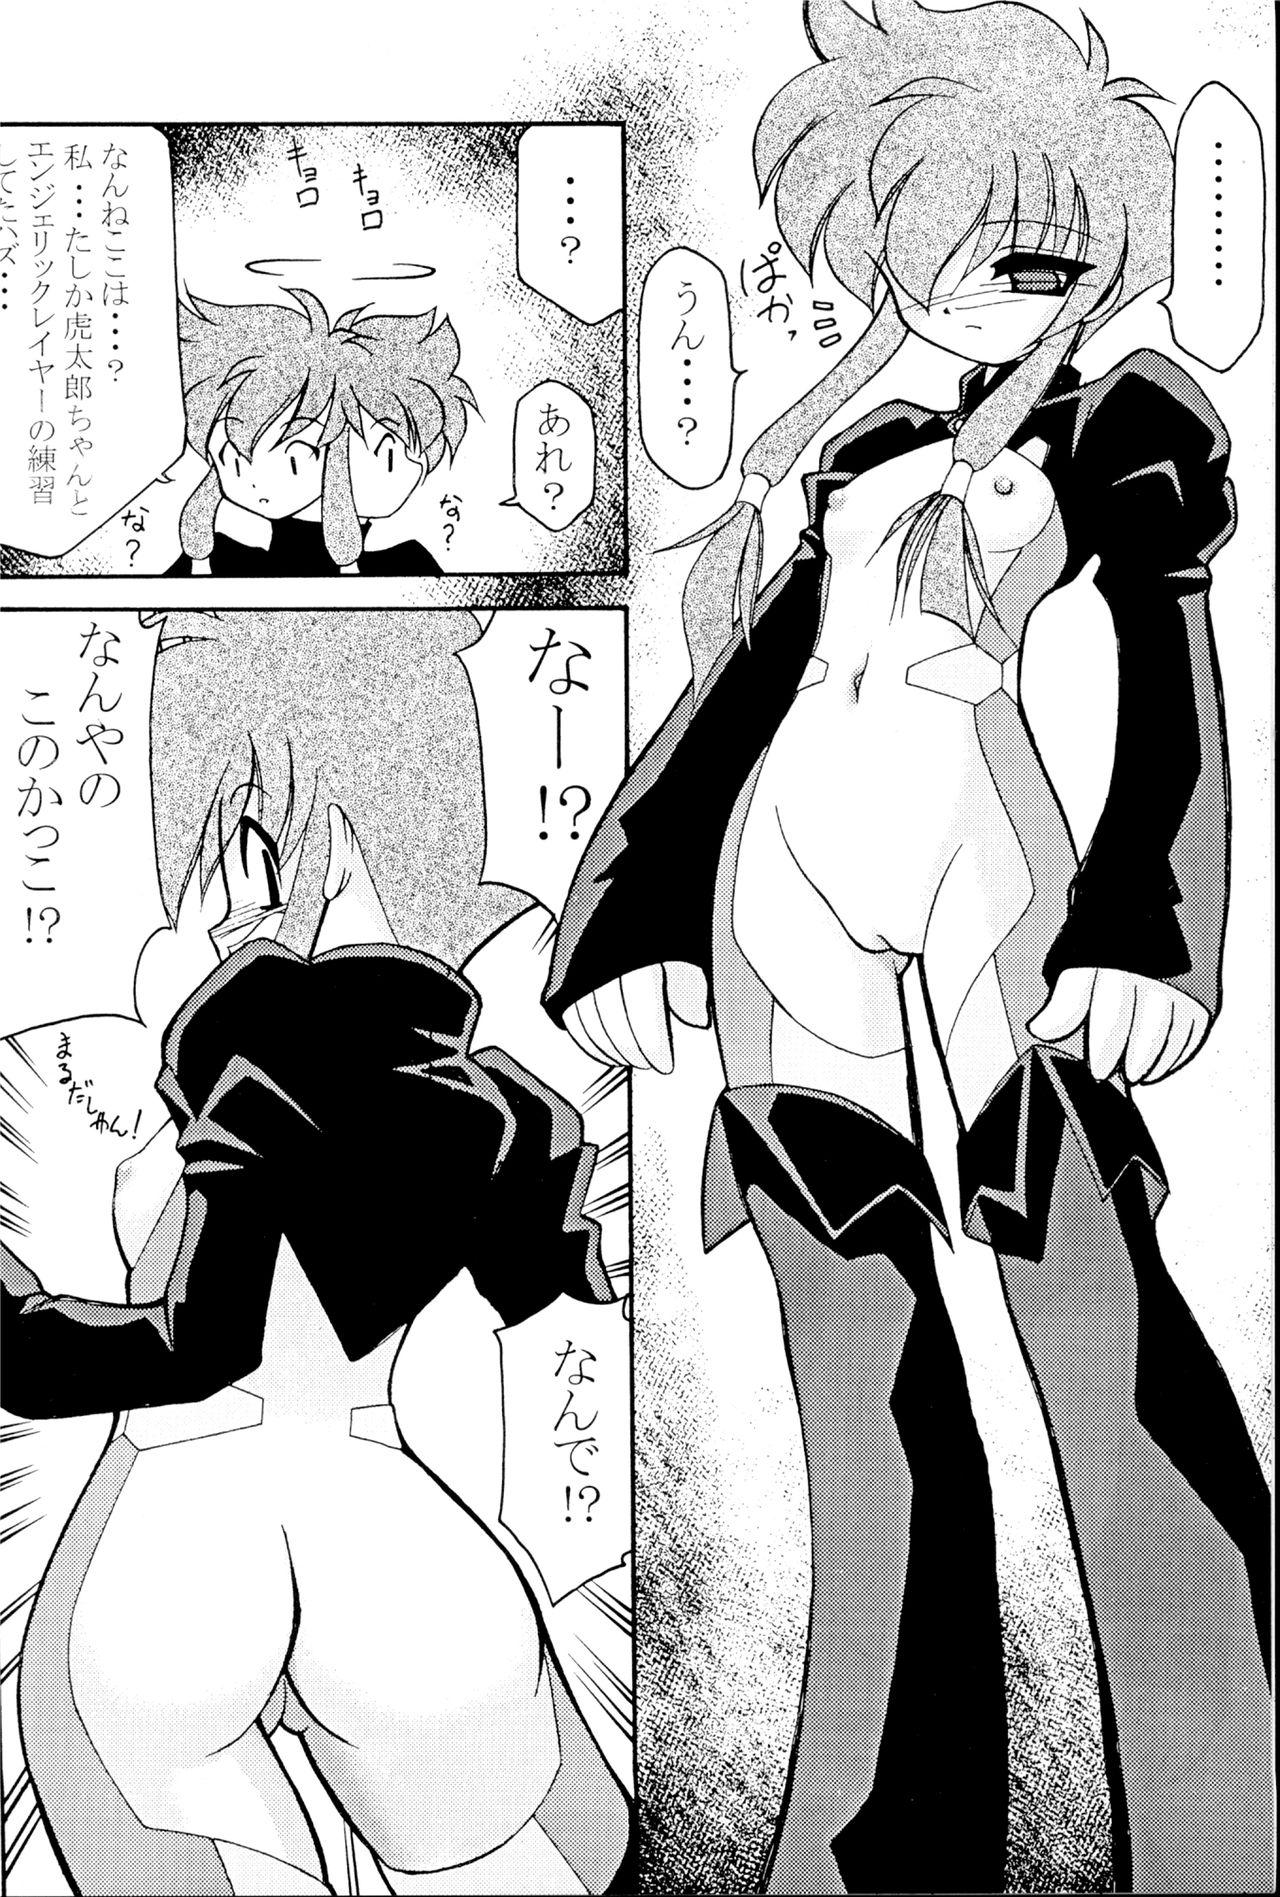 Gaystraight VERSUS - Magic knight rayearth Angelic layer Tgirl - Page 7